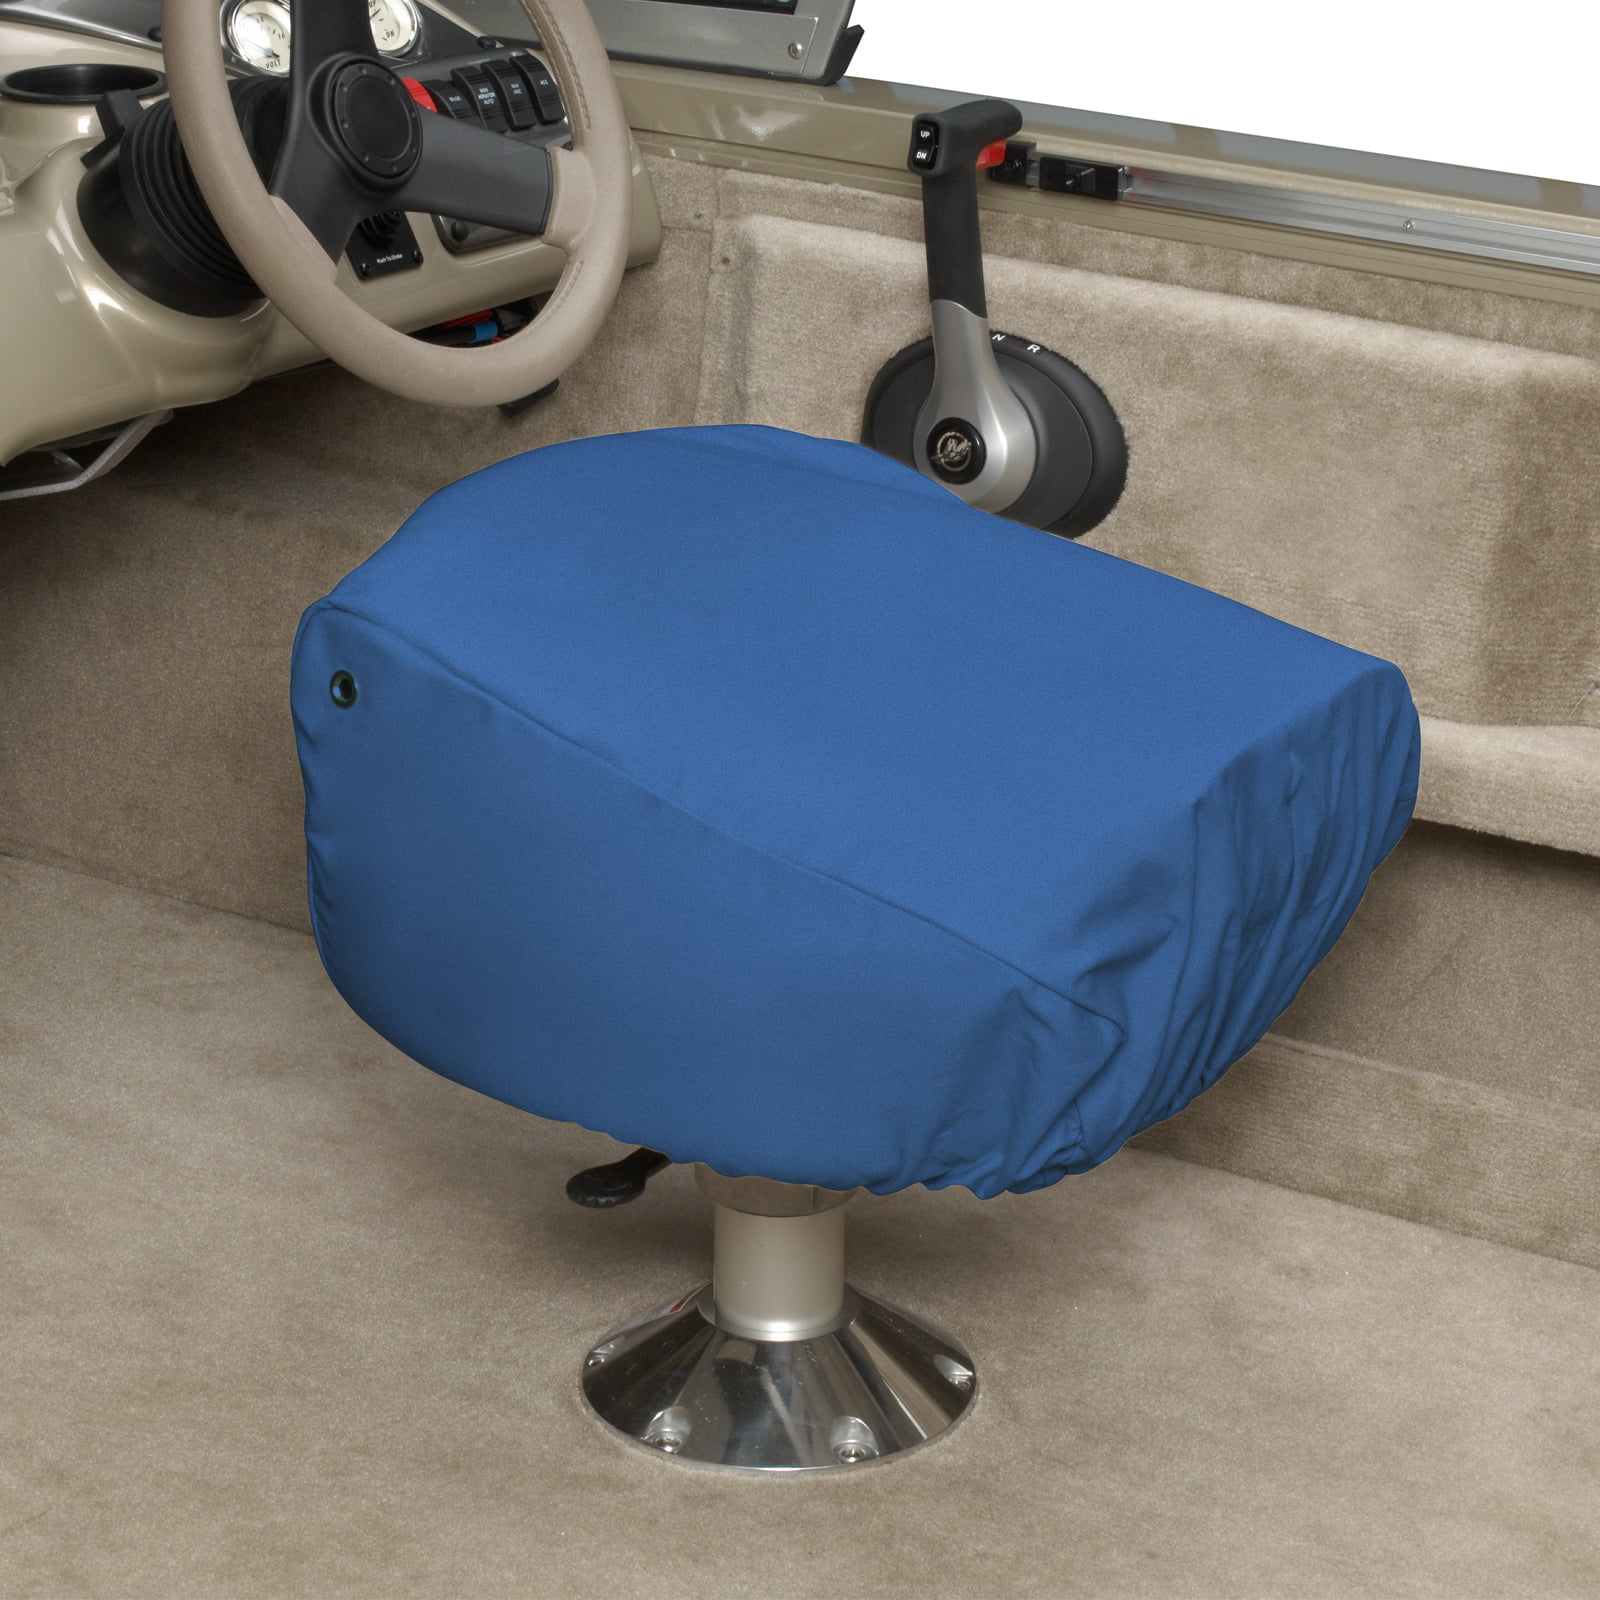 Budge Small Boat Bench Seat Cover Fits a Small Boat Bench Fits 22 Long x 37 Wide x 35 High Blue BA-11 